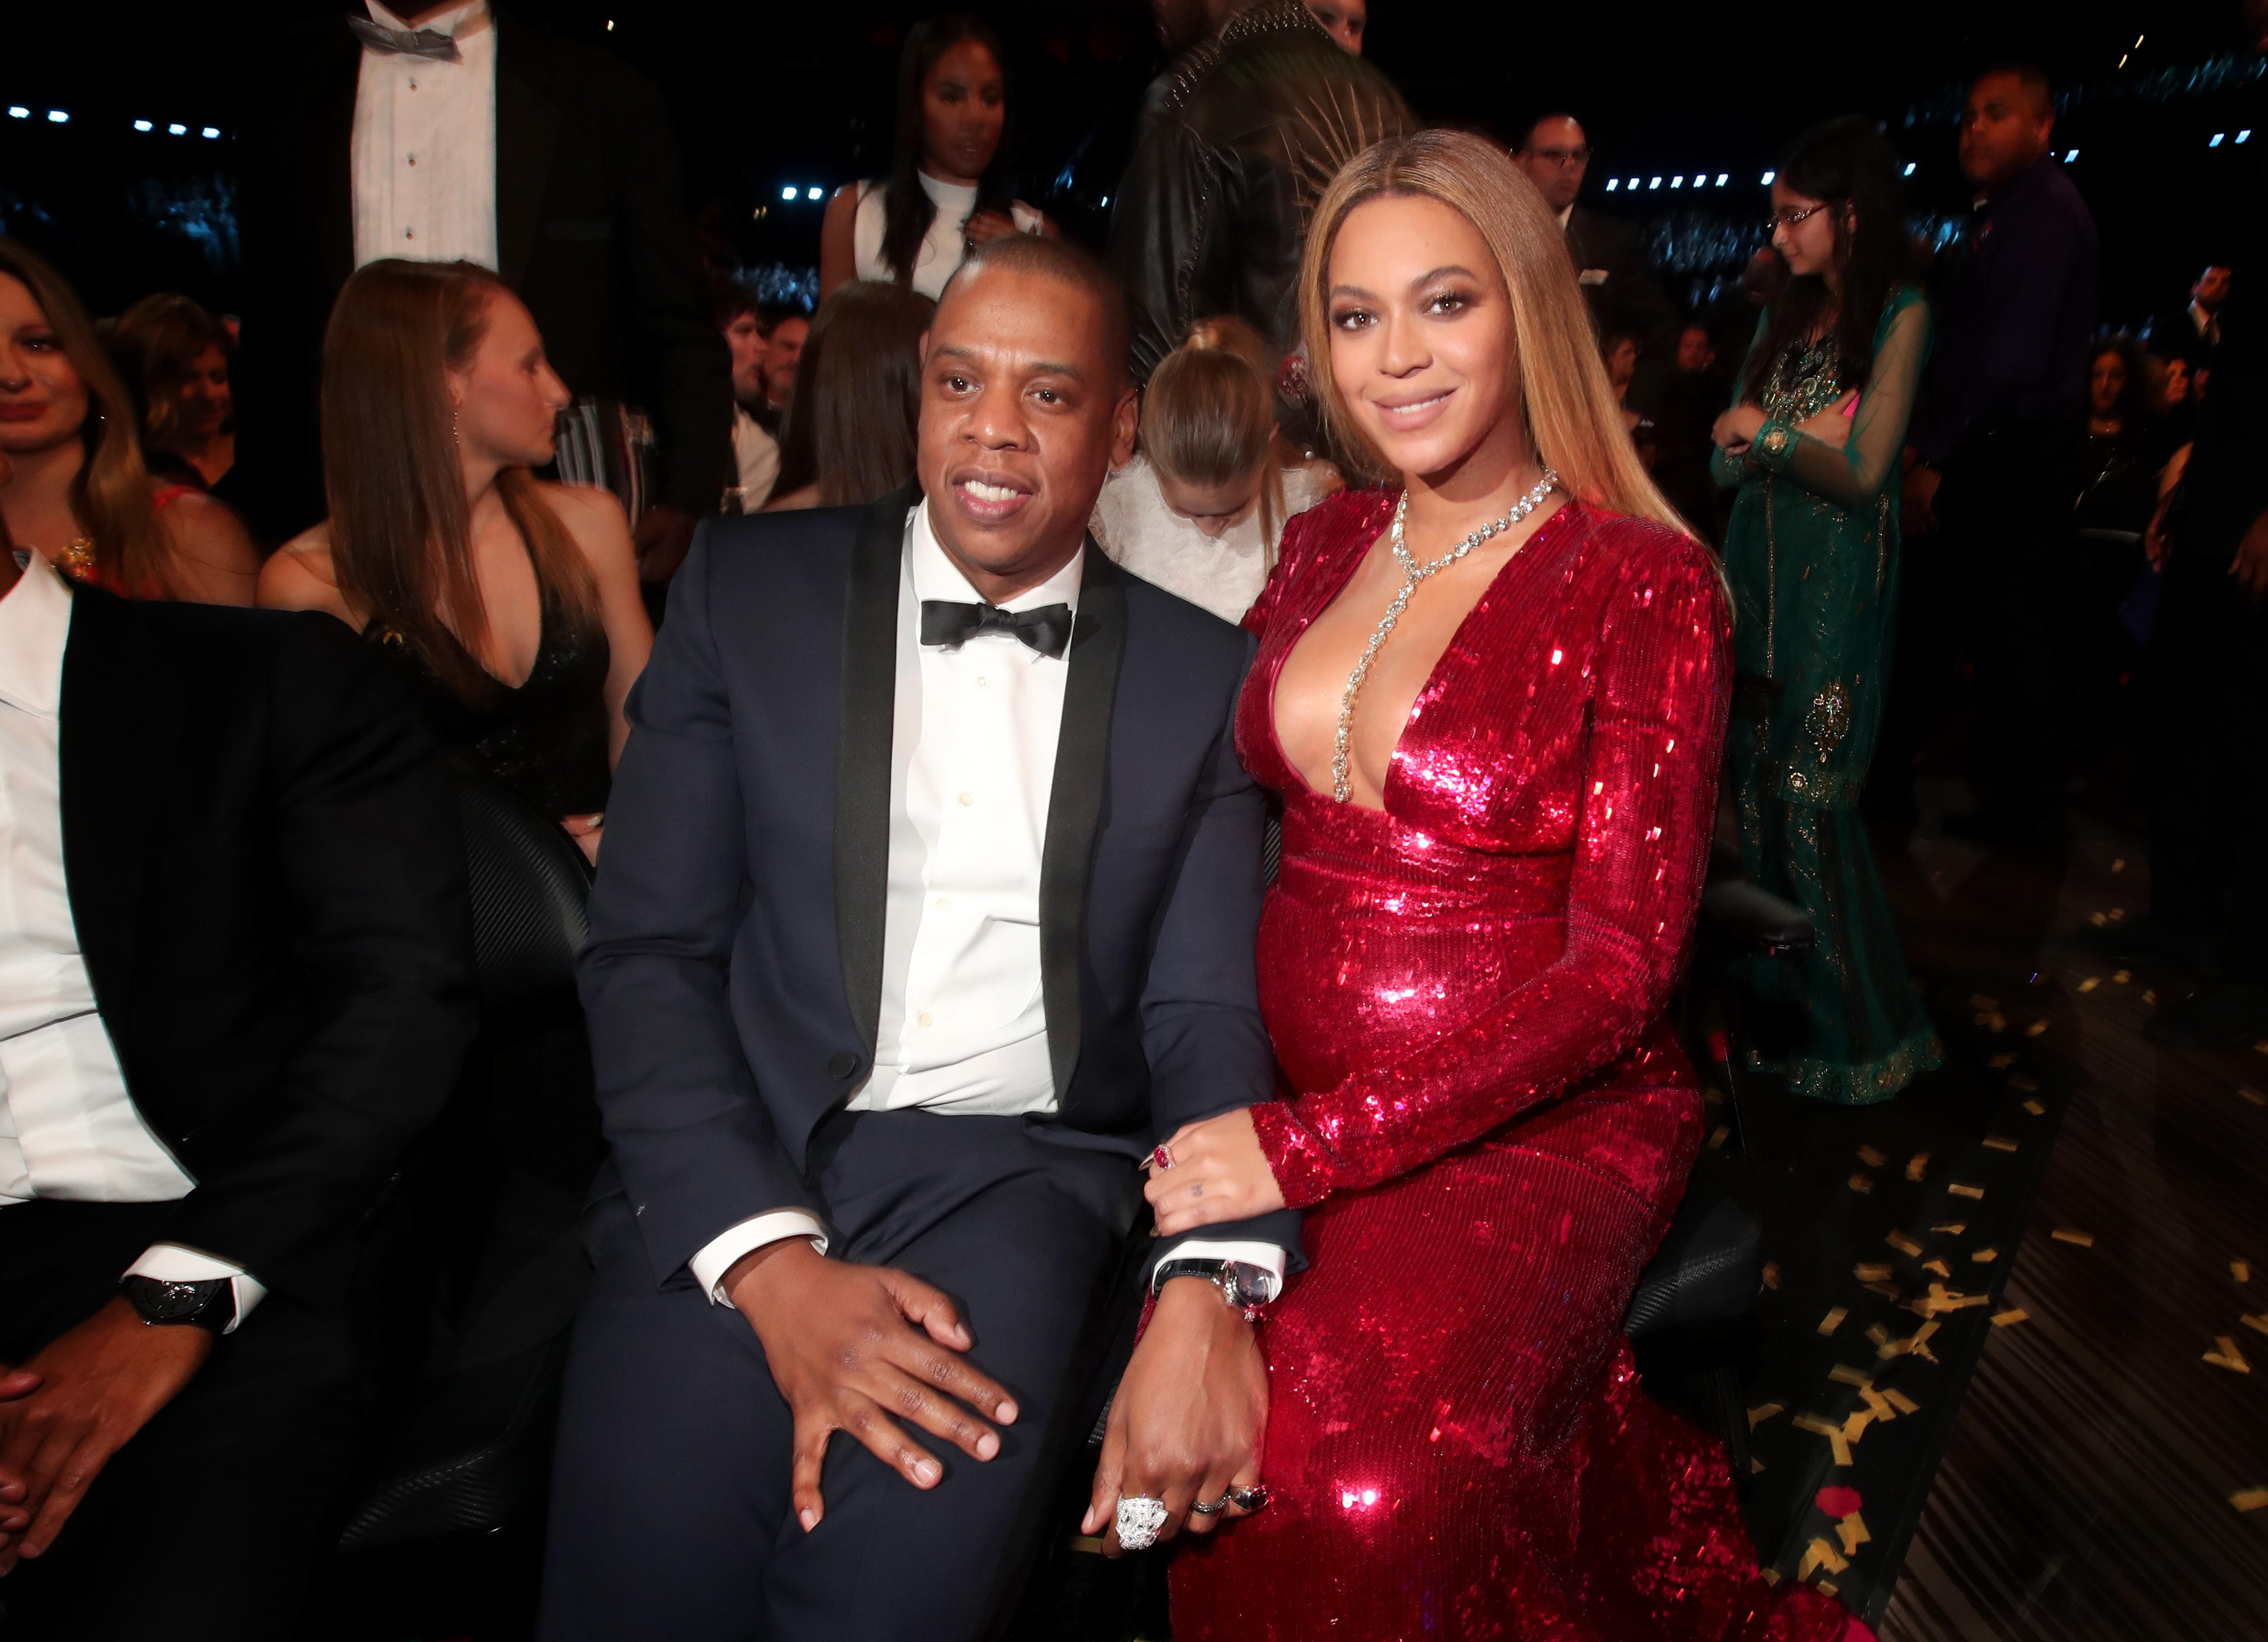 Famous love stories actually creepy - beyonce and jay z grammys